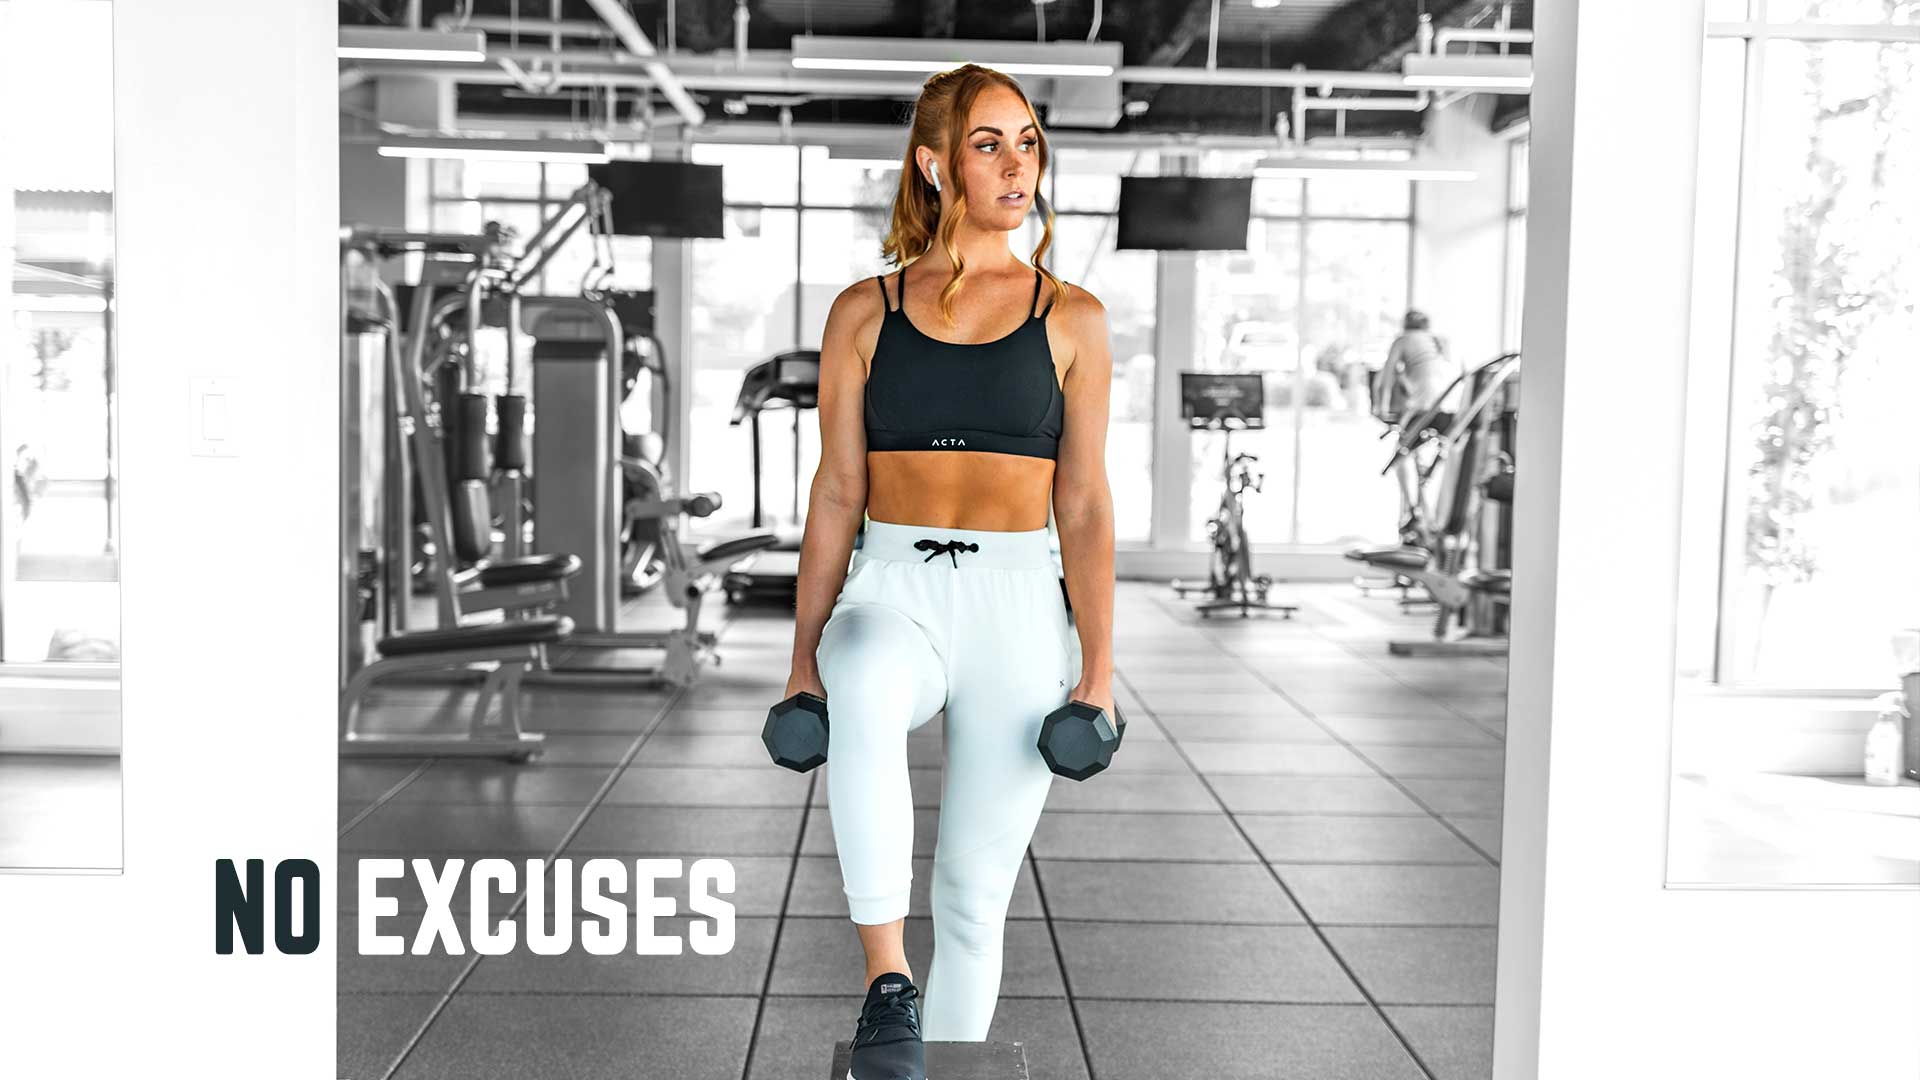 no-excuses-quote-motivational